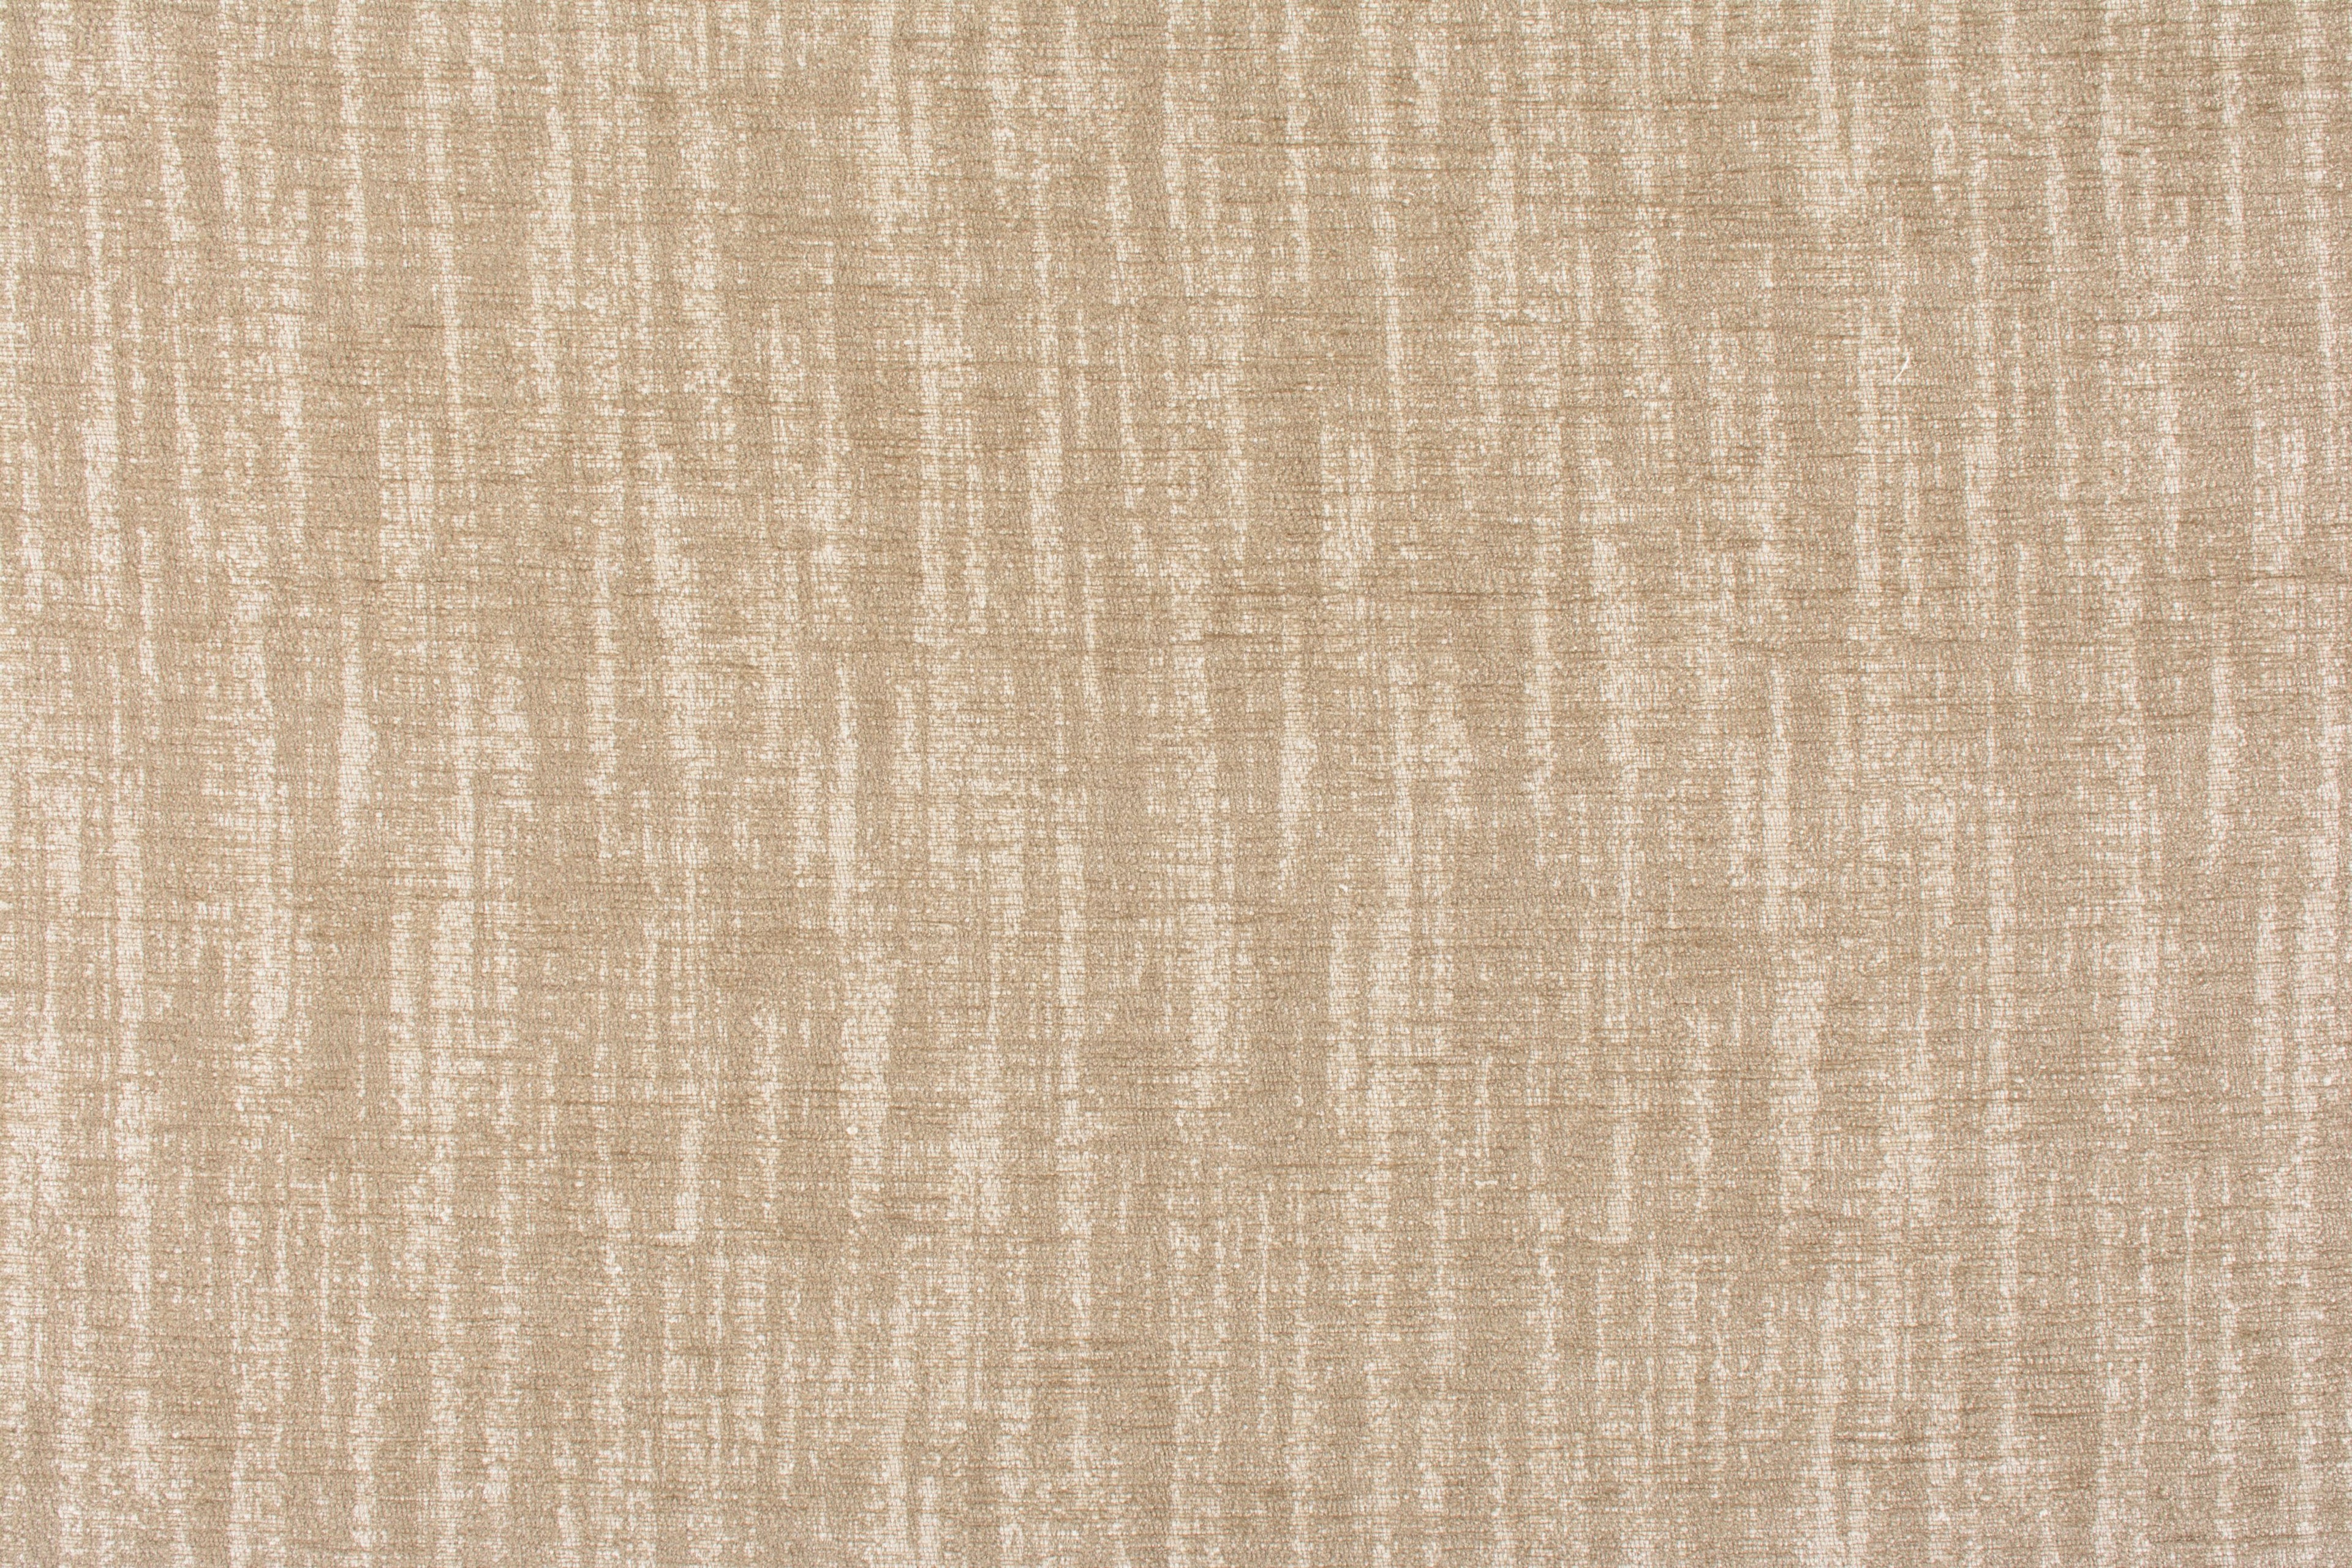 Gallium fabric in sand color - pattern number EL 0002NECK - by Scalamandre in the Old World Weavers collection